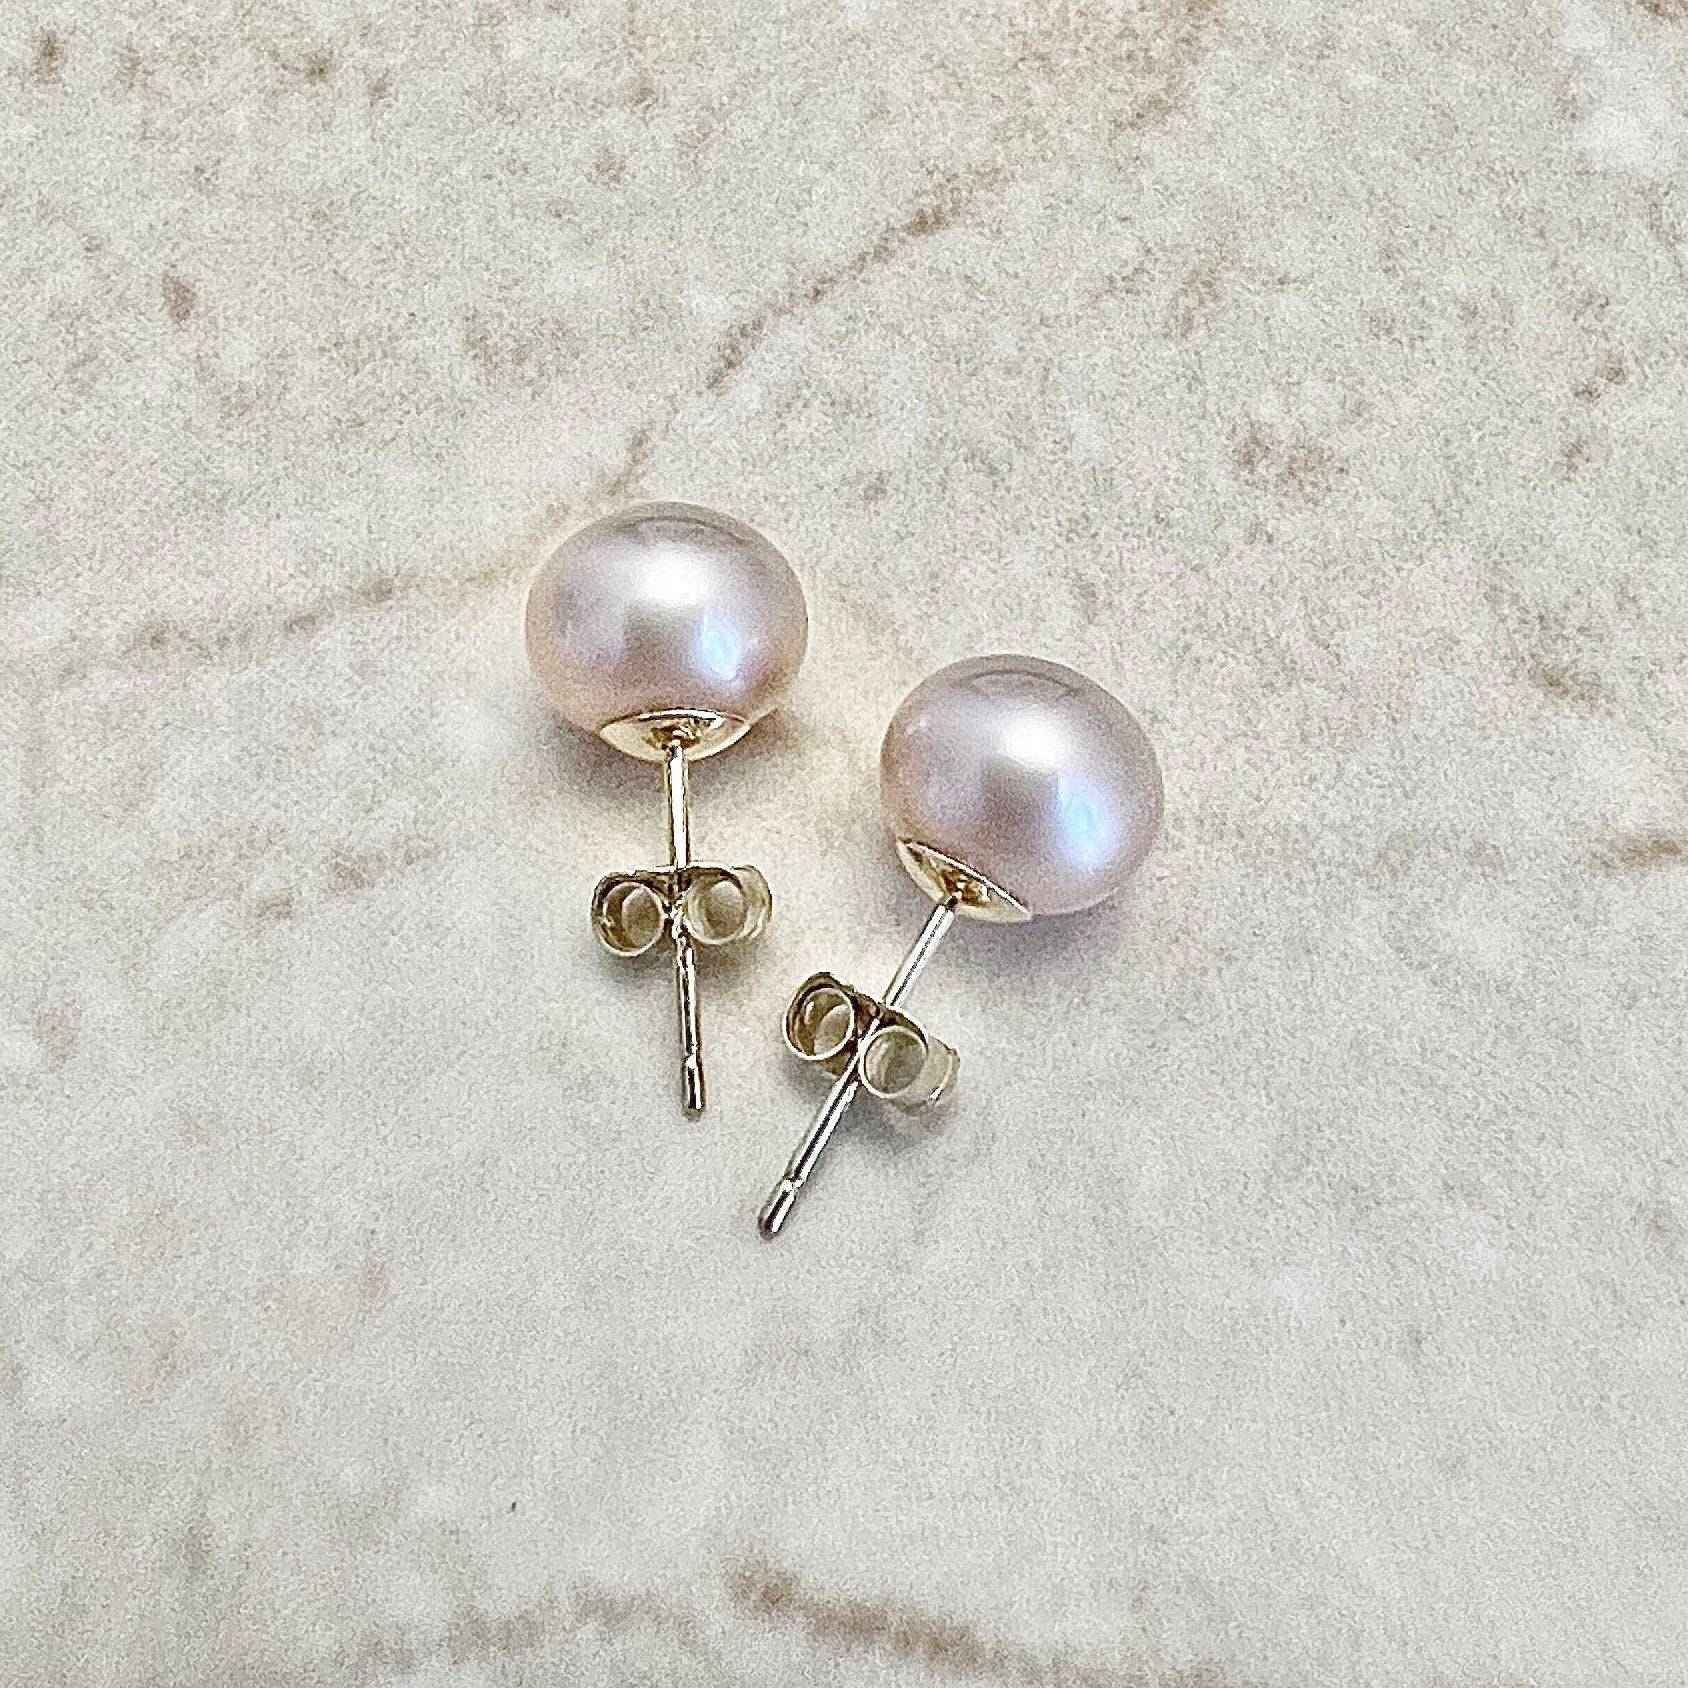 Classic Peach Pearl Stud Earrings In 14 Karat Yellow Gold - Genuine Freshwater Button Pearls - Best Birthday Gift For Her - June Birthstone